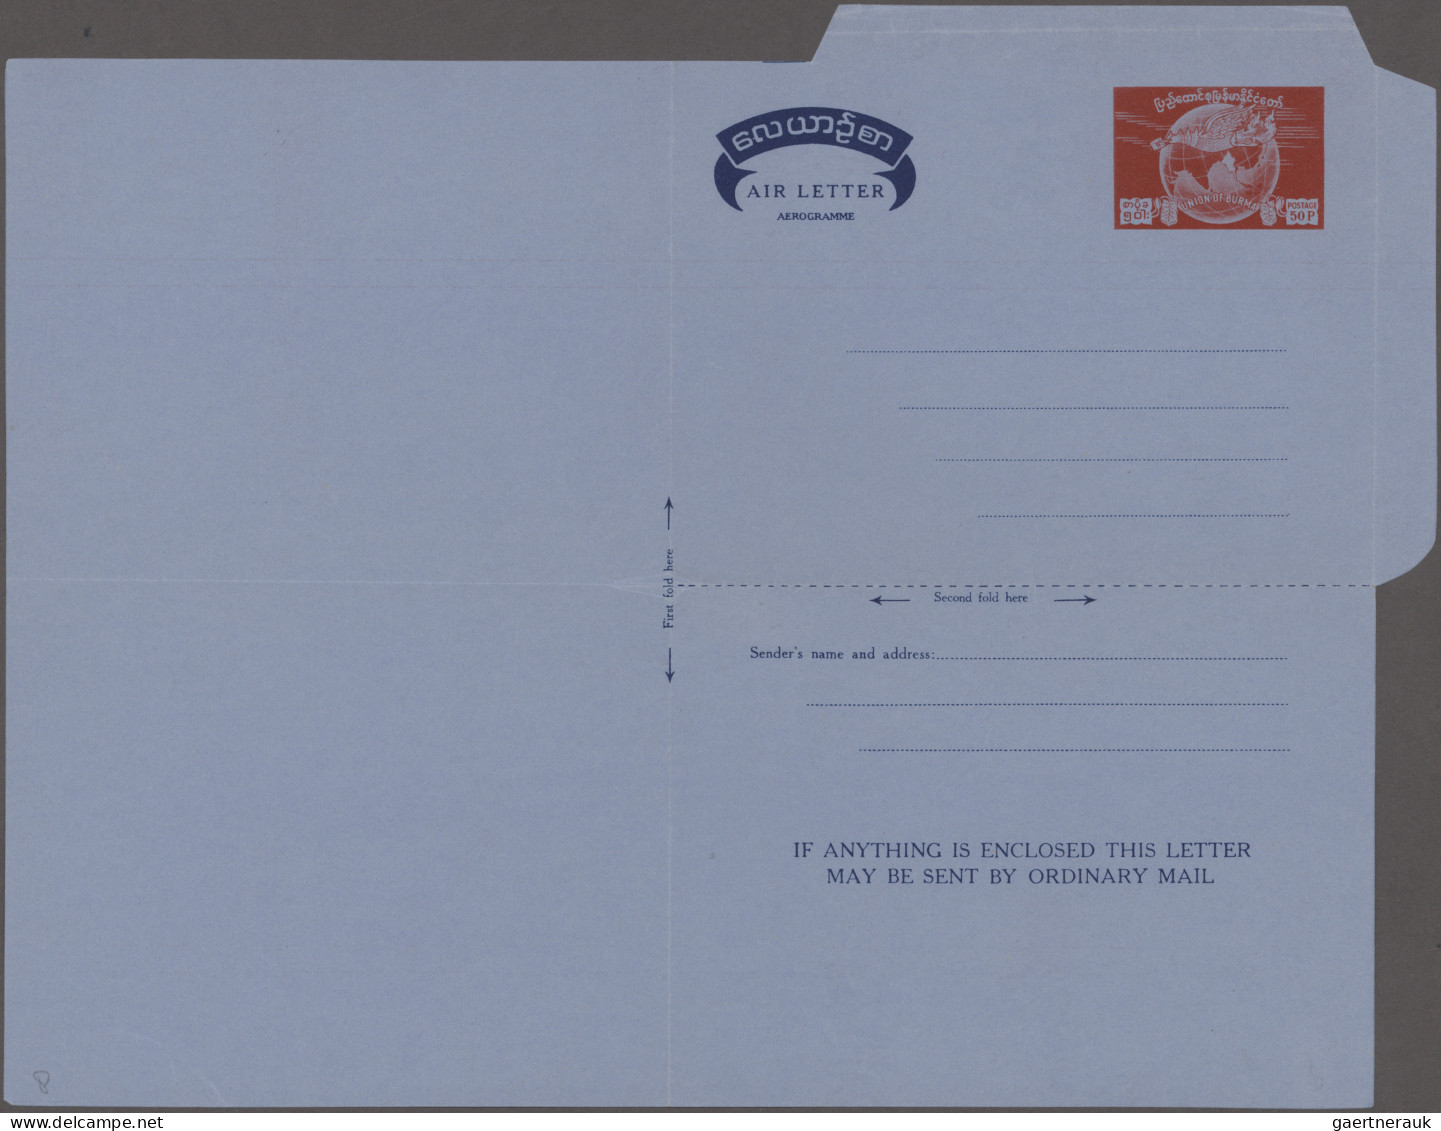 Birma - postal stationery: 1954/1990 (ca.), group of 28 air letter sheets (16 un